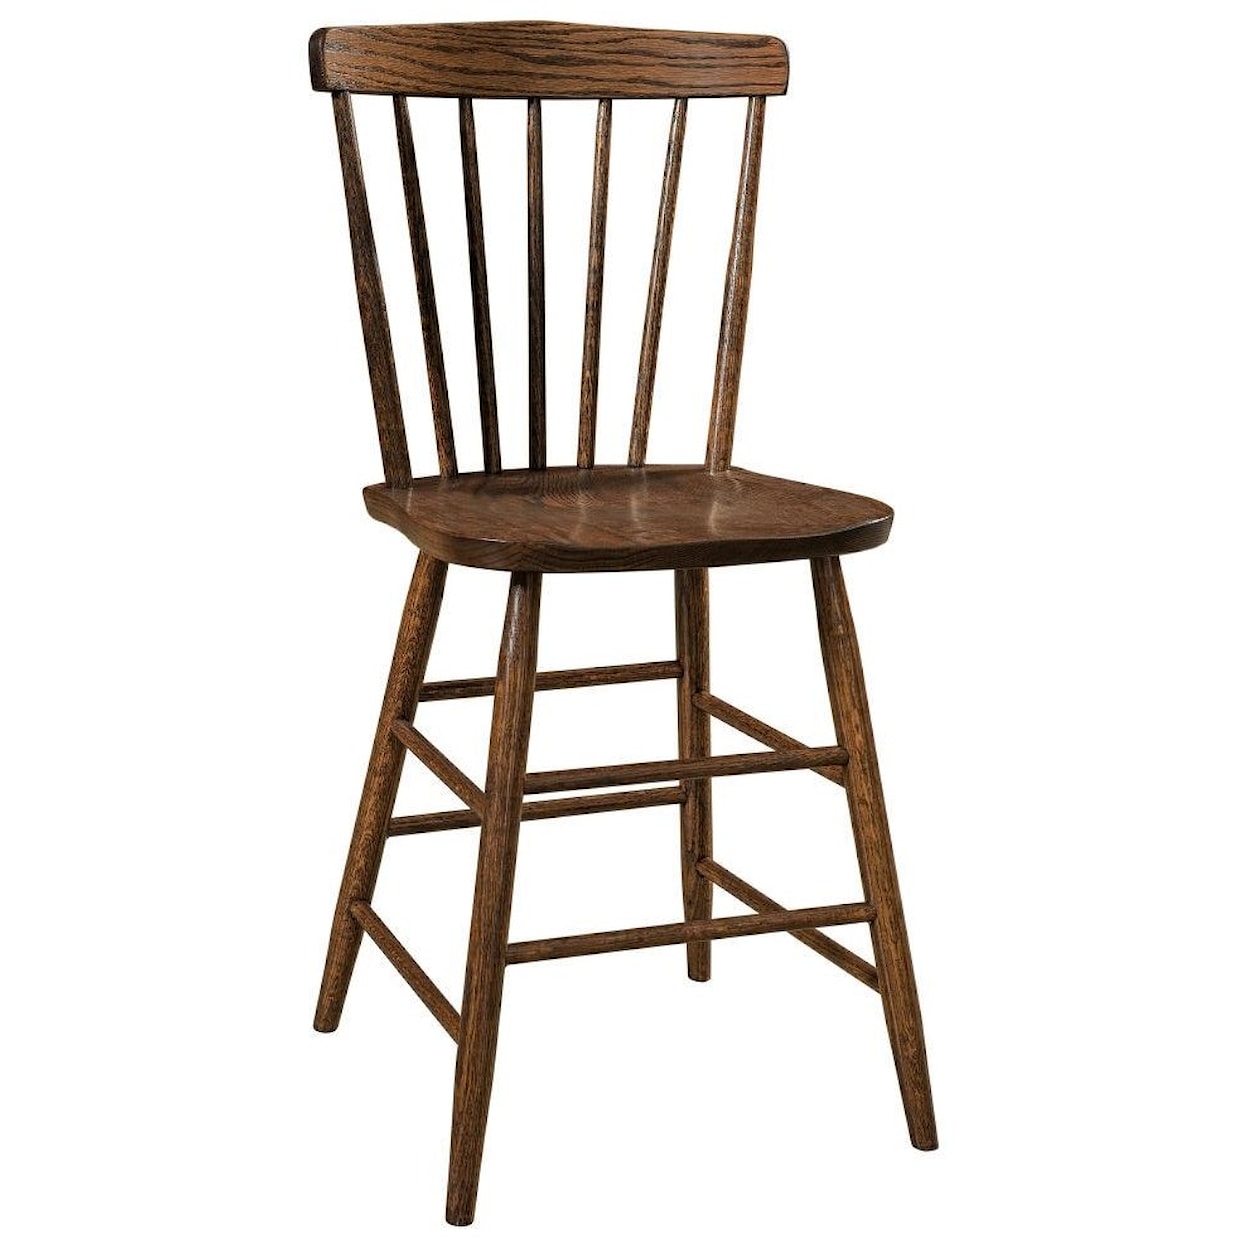 F&N Woodworking Cantaberry 30" Stationary Stool